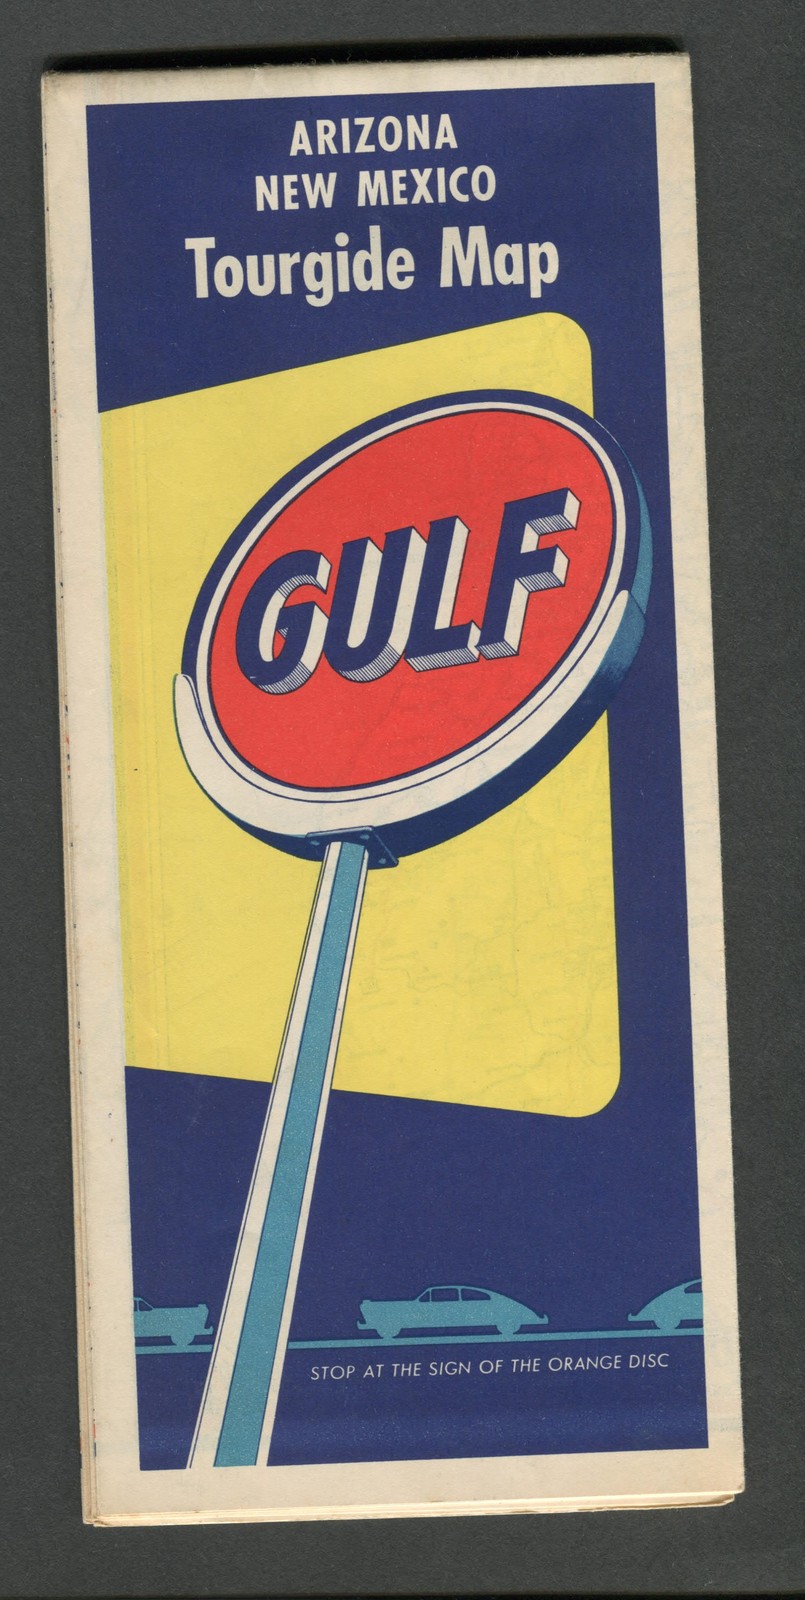 Primary image for circa 1950 Arizona and New Mexico Tourgide Map by Gulf Oil